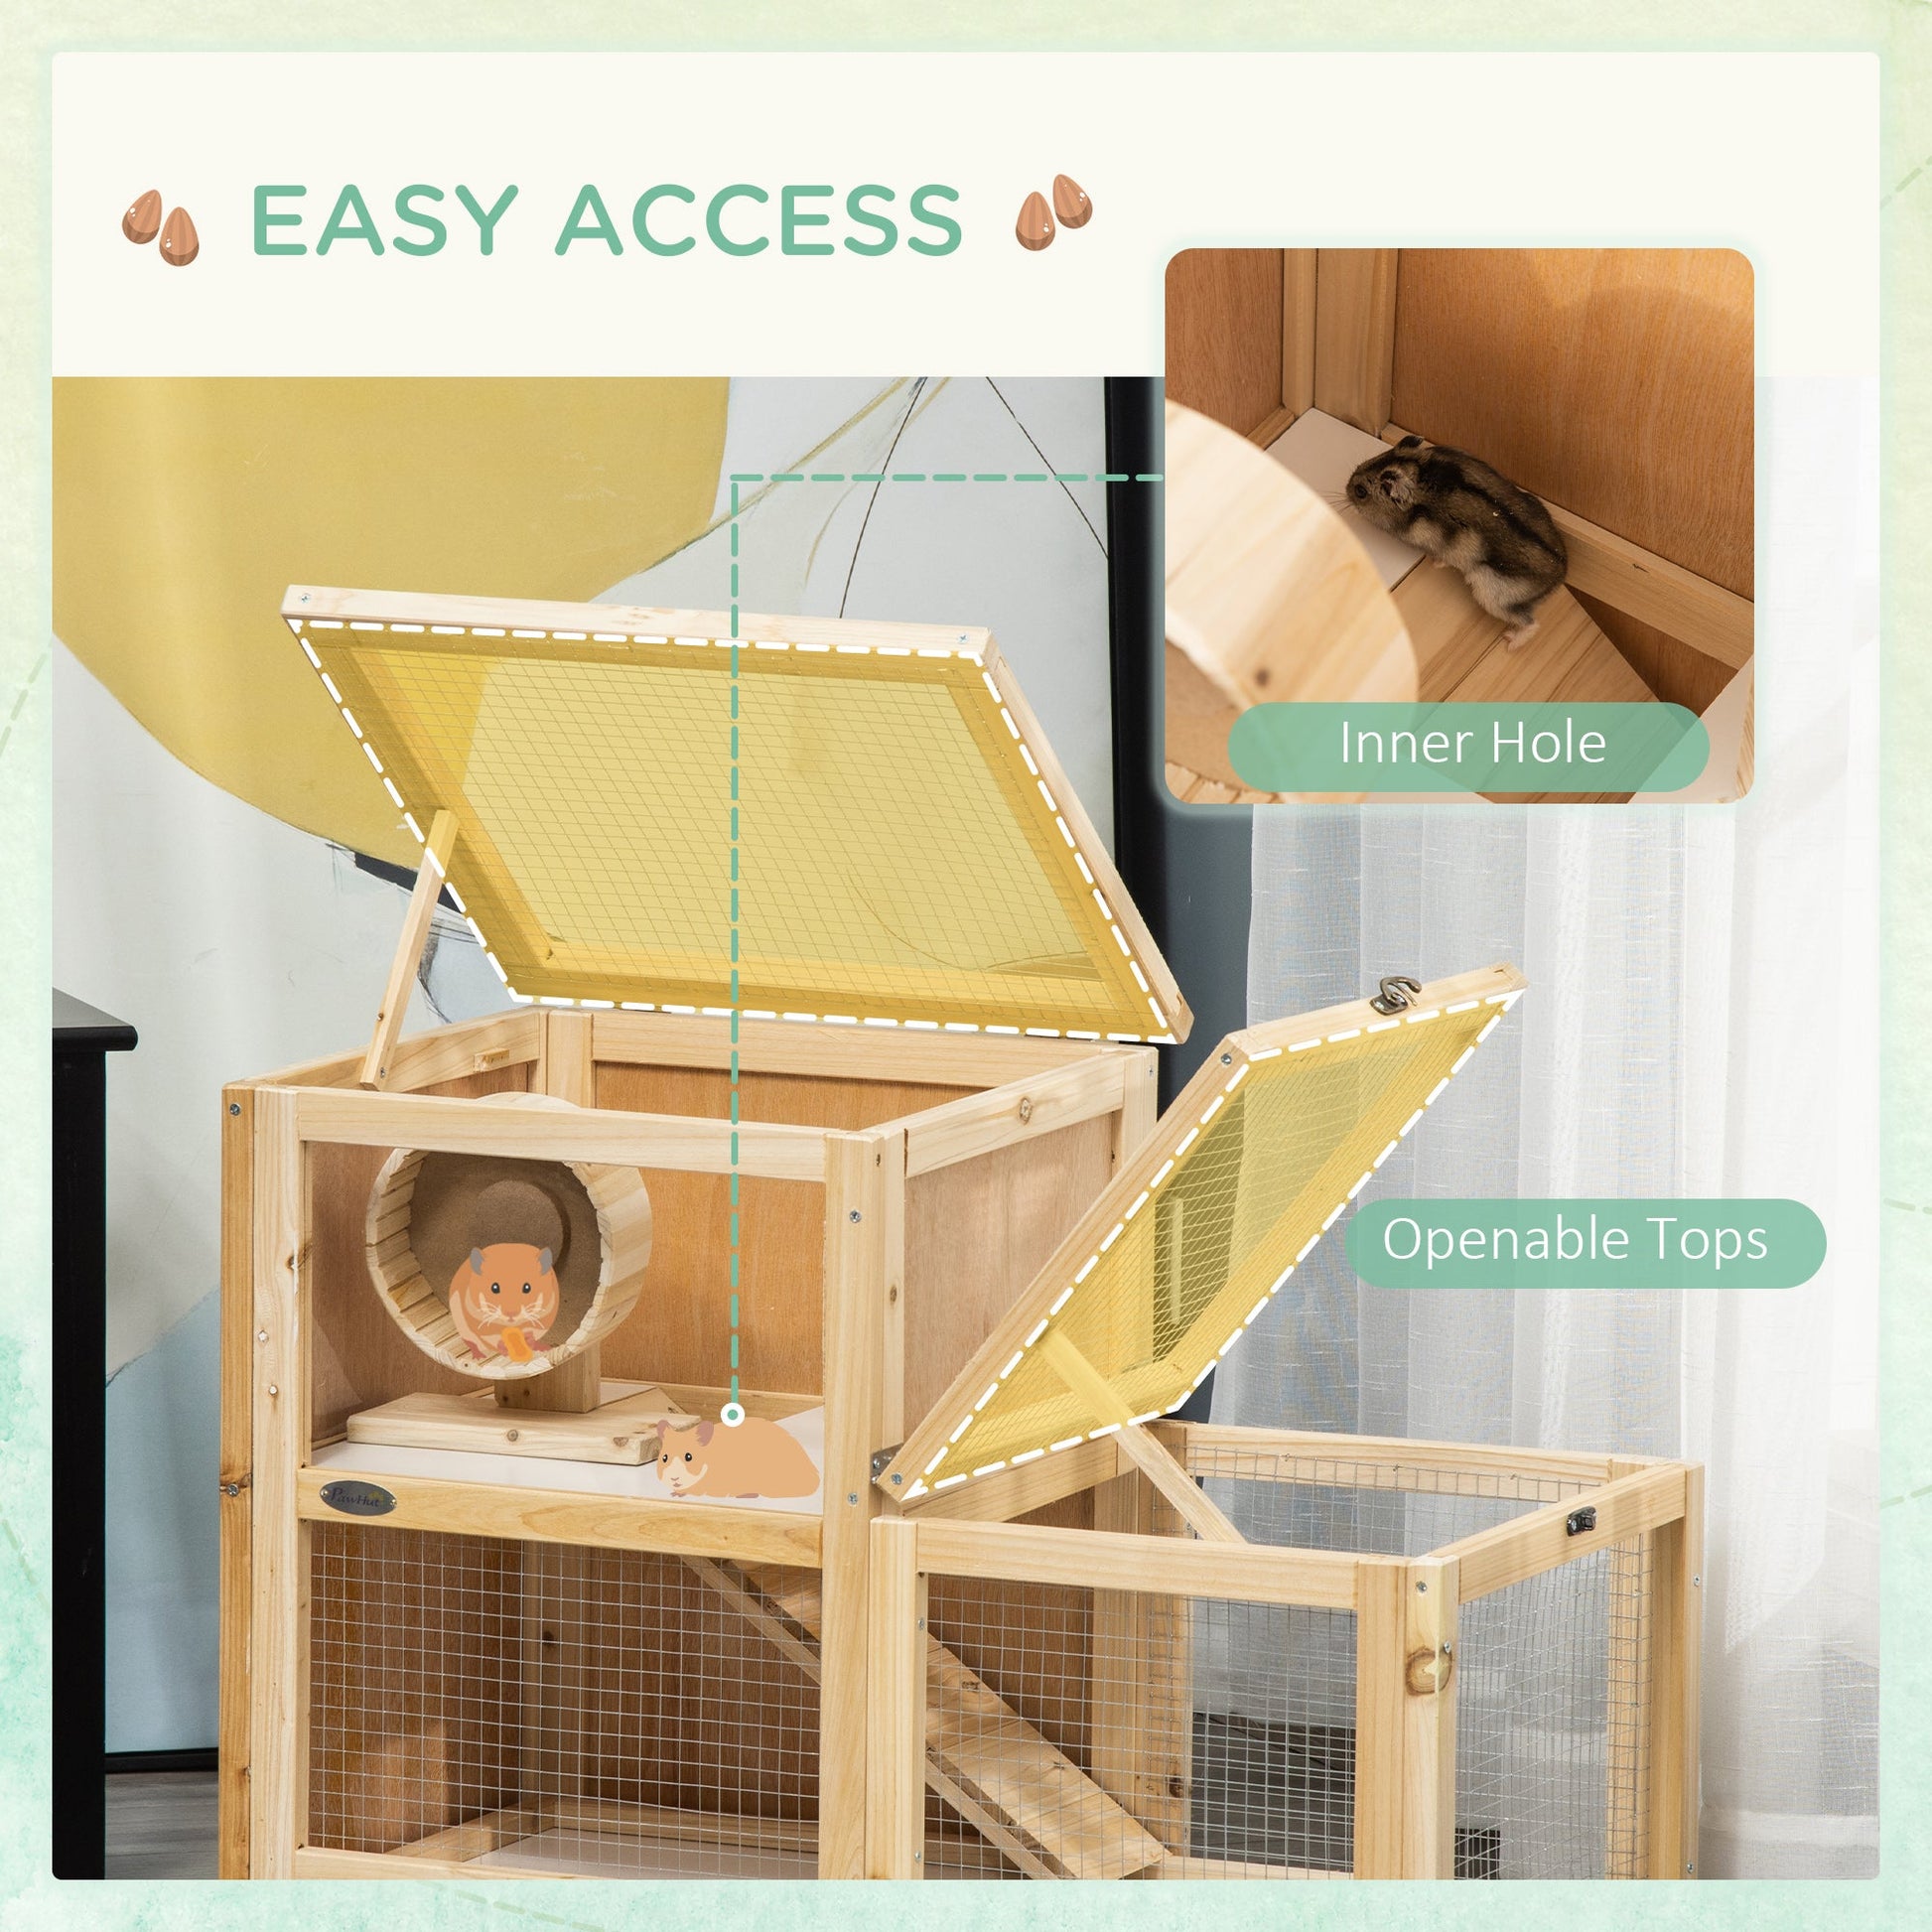 Wooden Hamster Cage, Mice Rodent Small Animals Kit Hutch, 2 Tiers Exercise Play House, with Sliding Tray, Ladder, Seesaw, Running Wheel, Openable Roofs, 31" x 16" x 23.5", Natural Wood - Gallery Canada